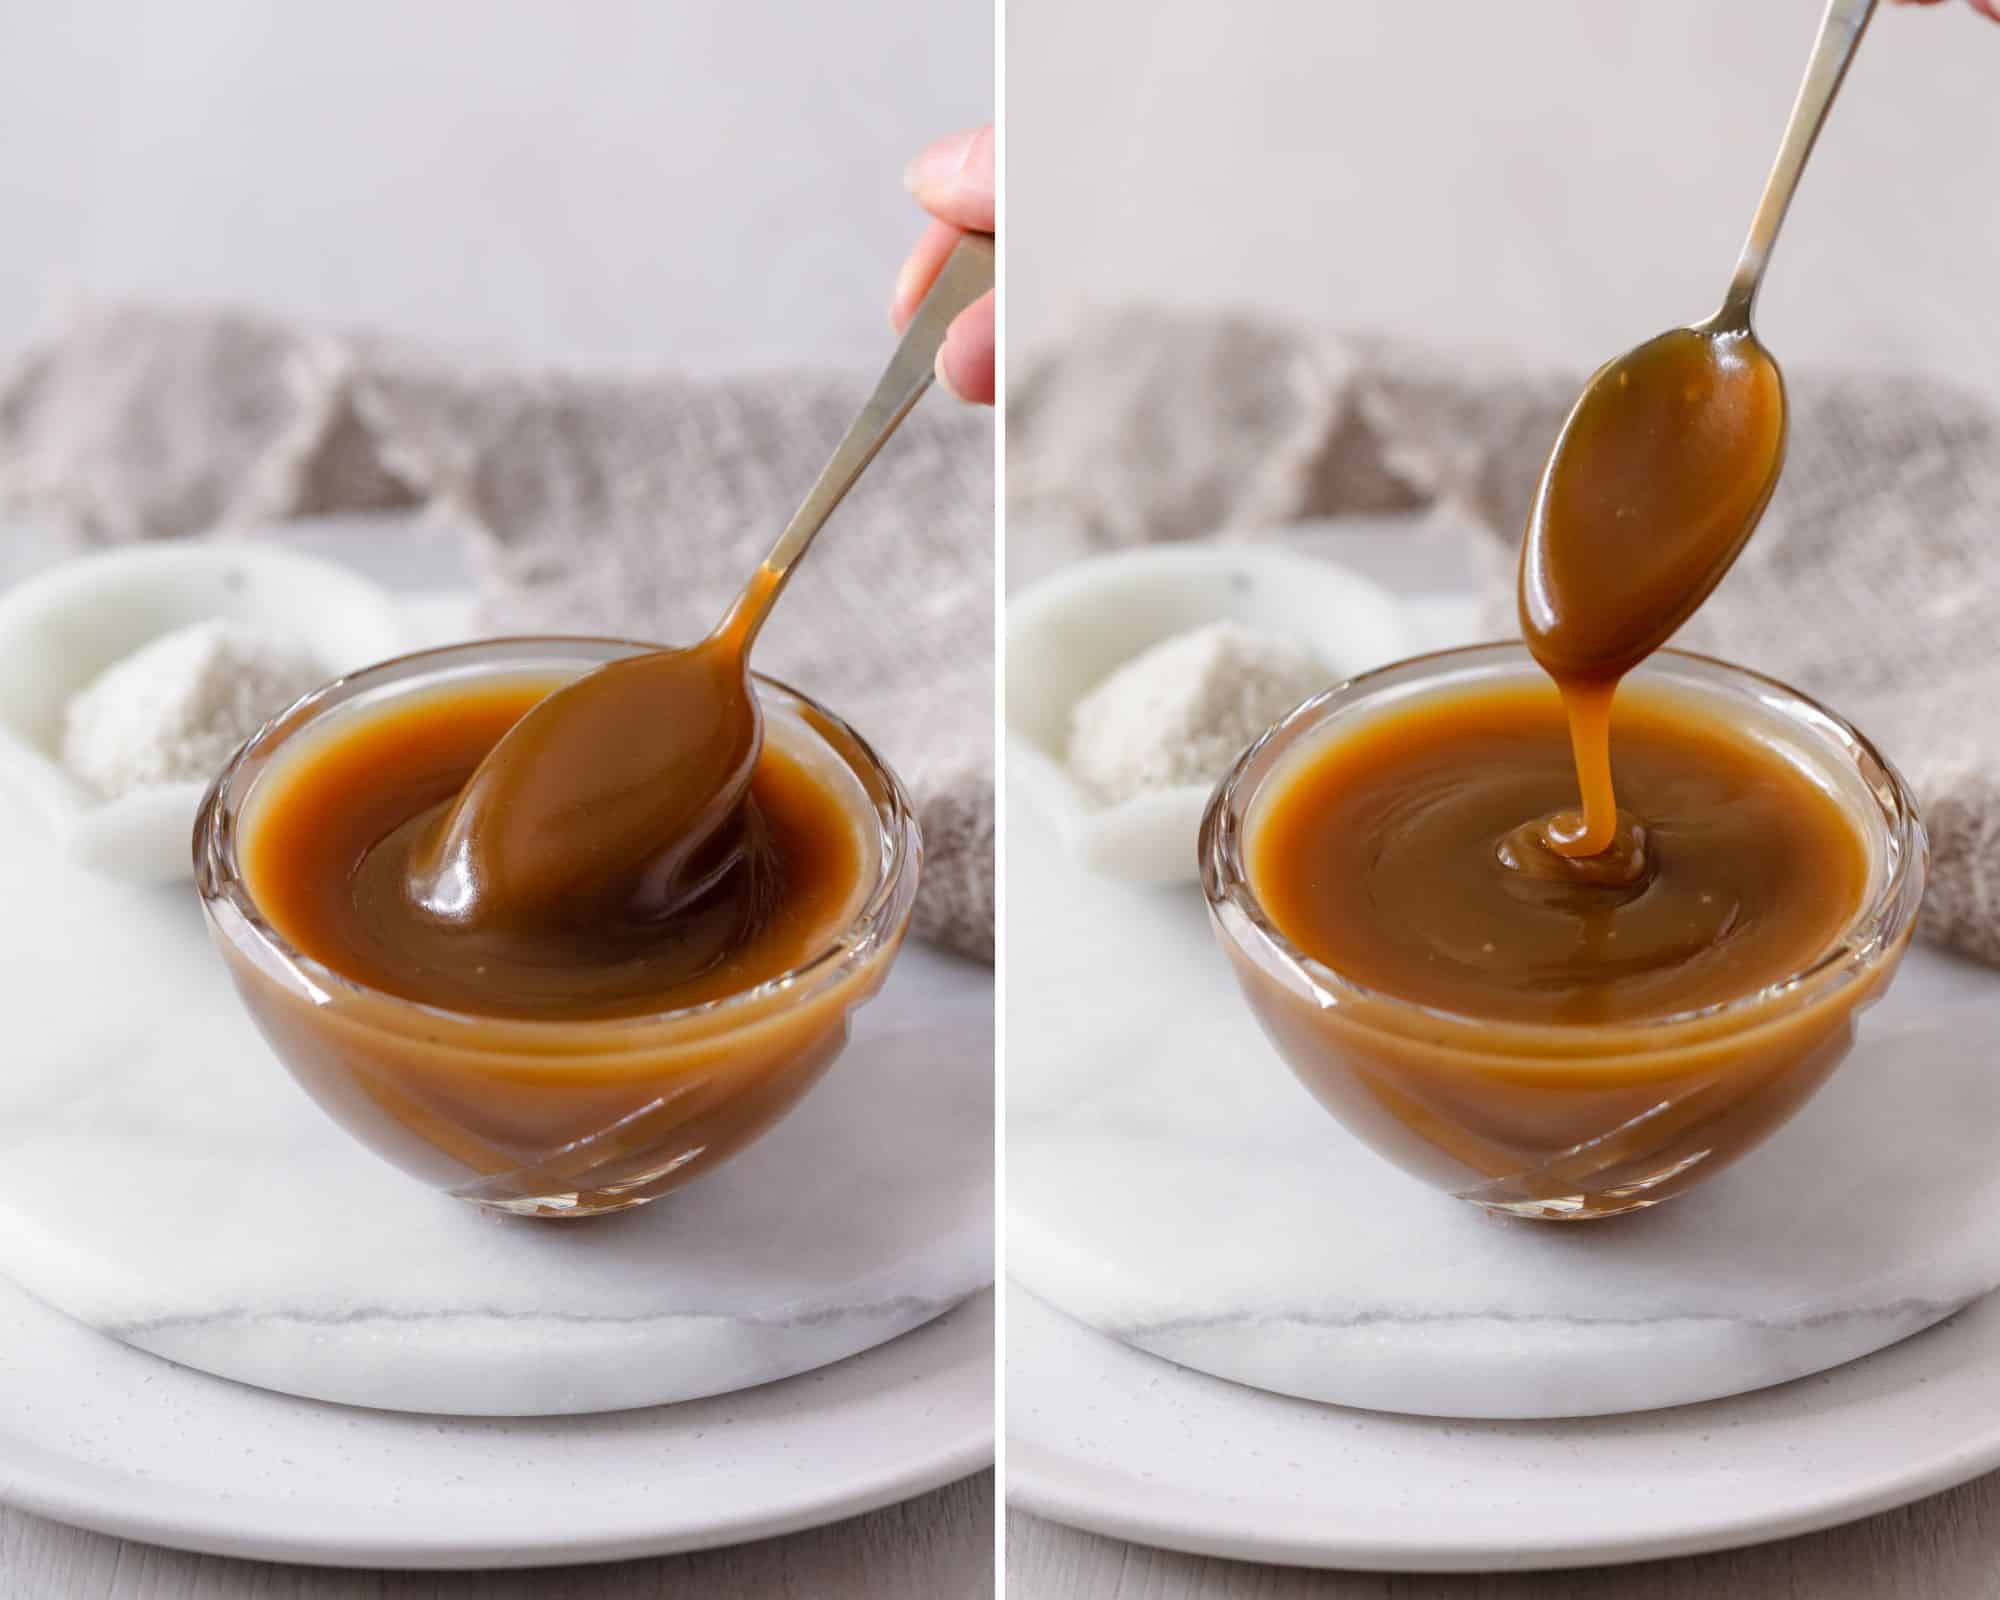 Caramel sauce in bowl with spoon scooping some out and drizzling it back down into the bowl.